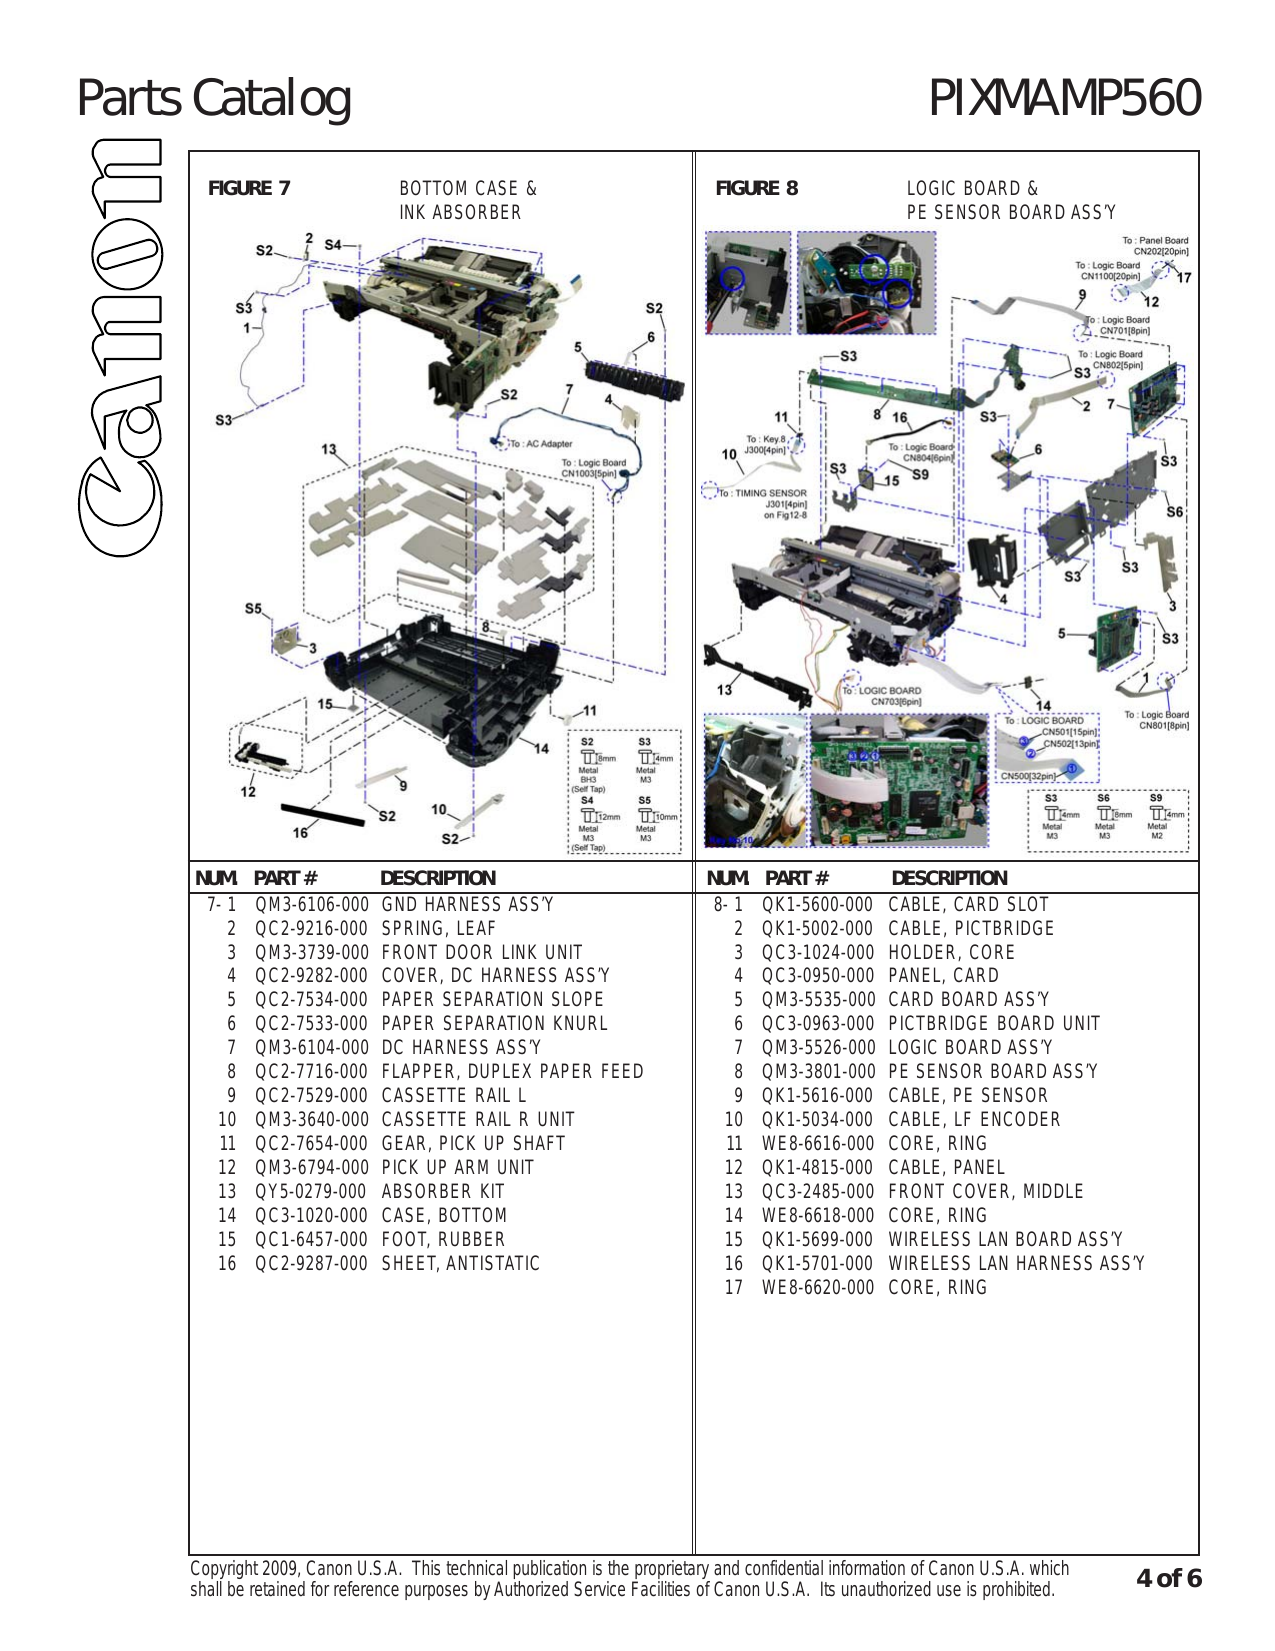 Canon Pixma MP560 all-in-one inkjet printer parts catalog Preview image 5